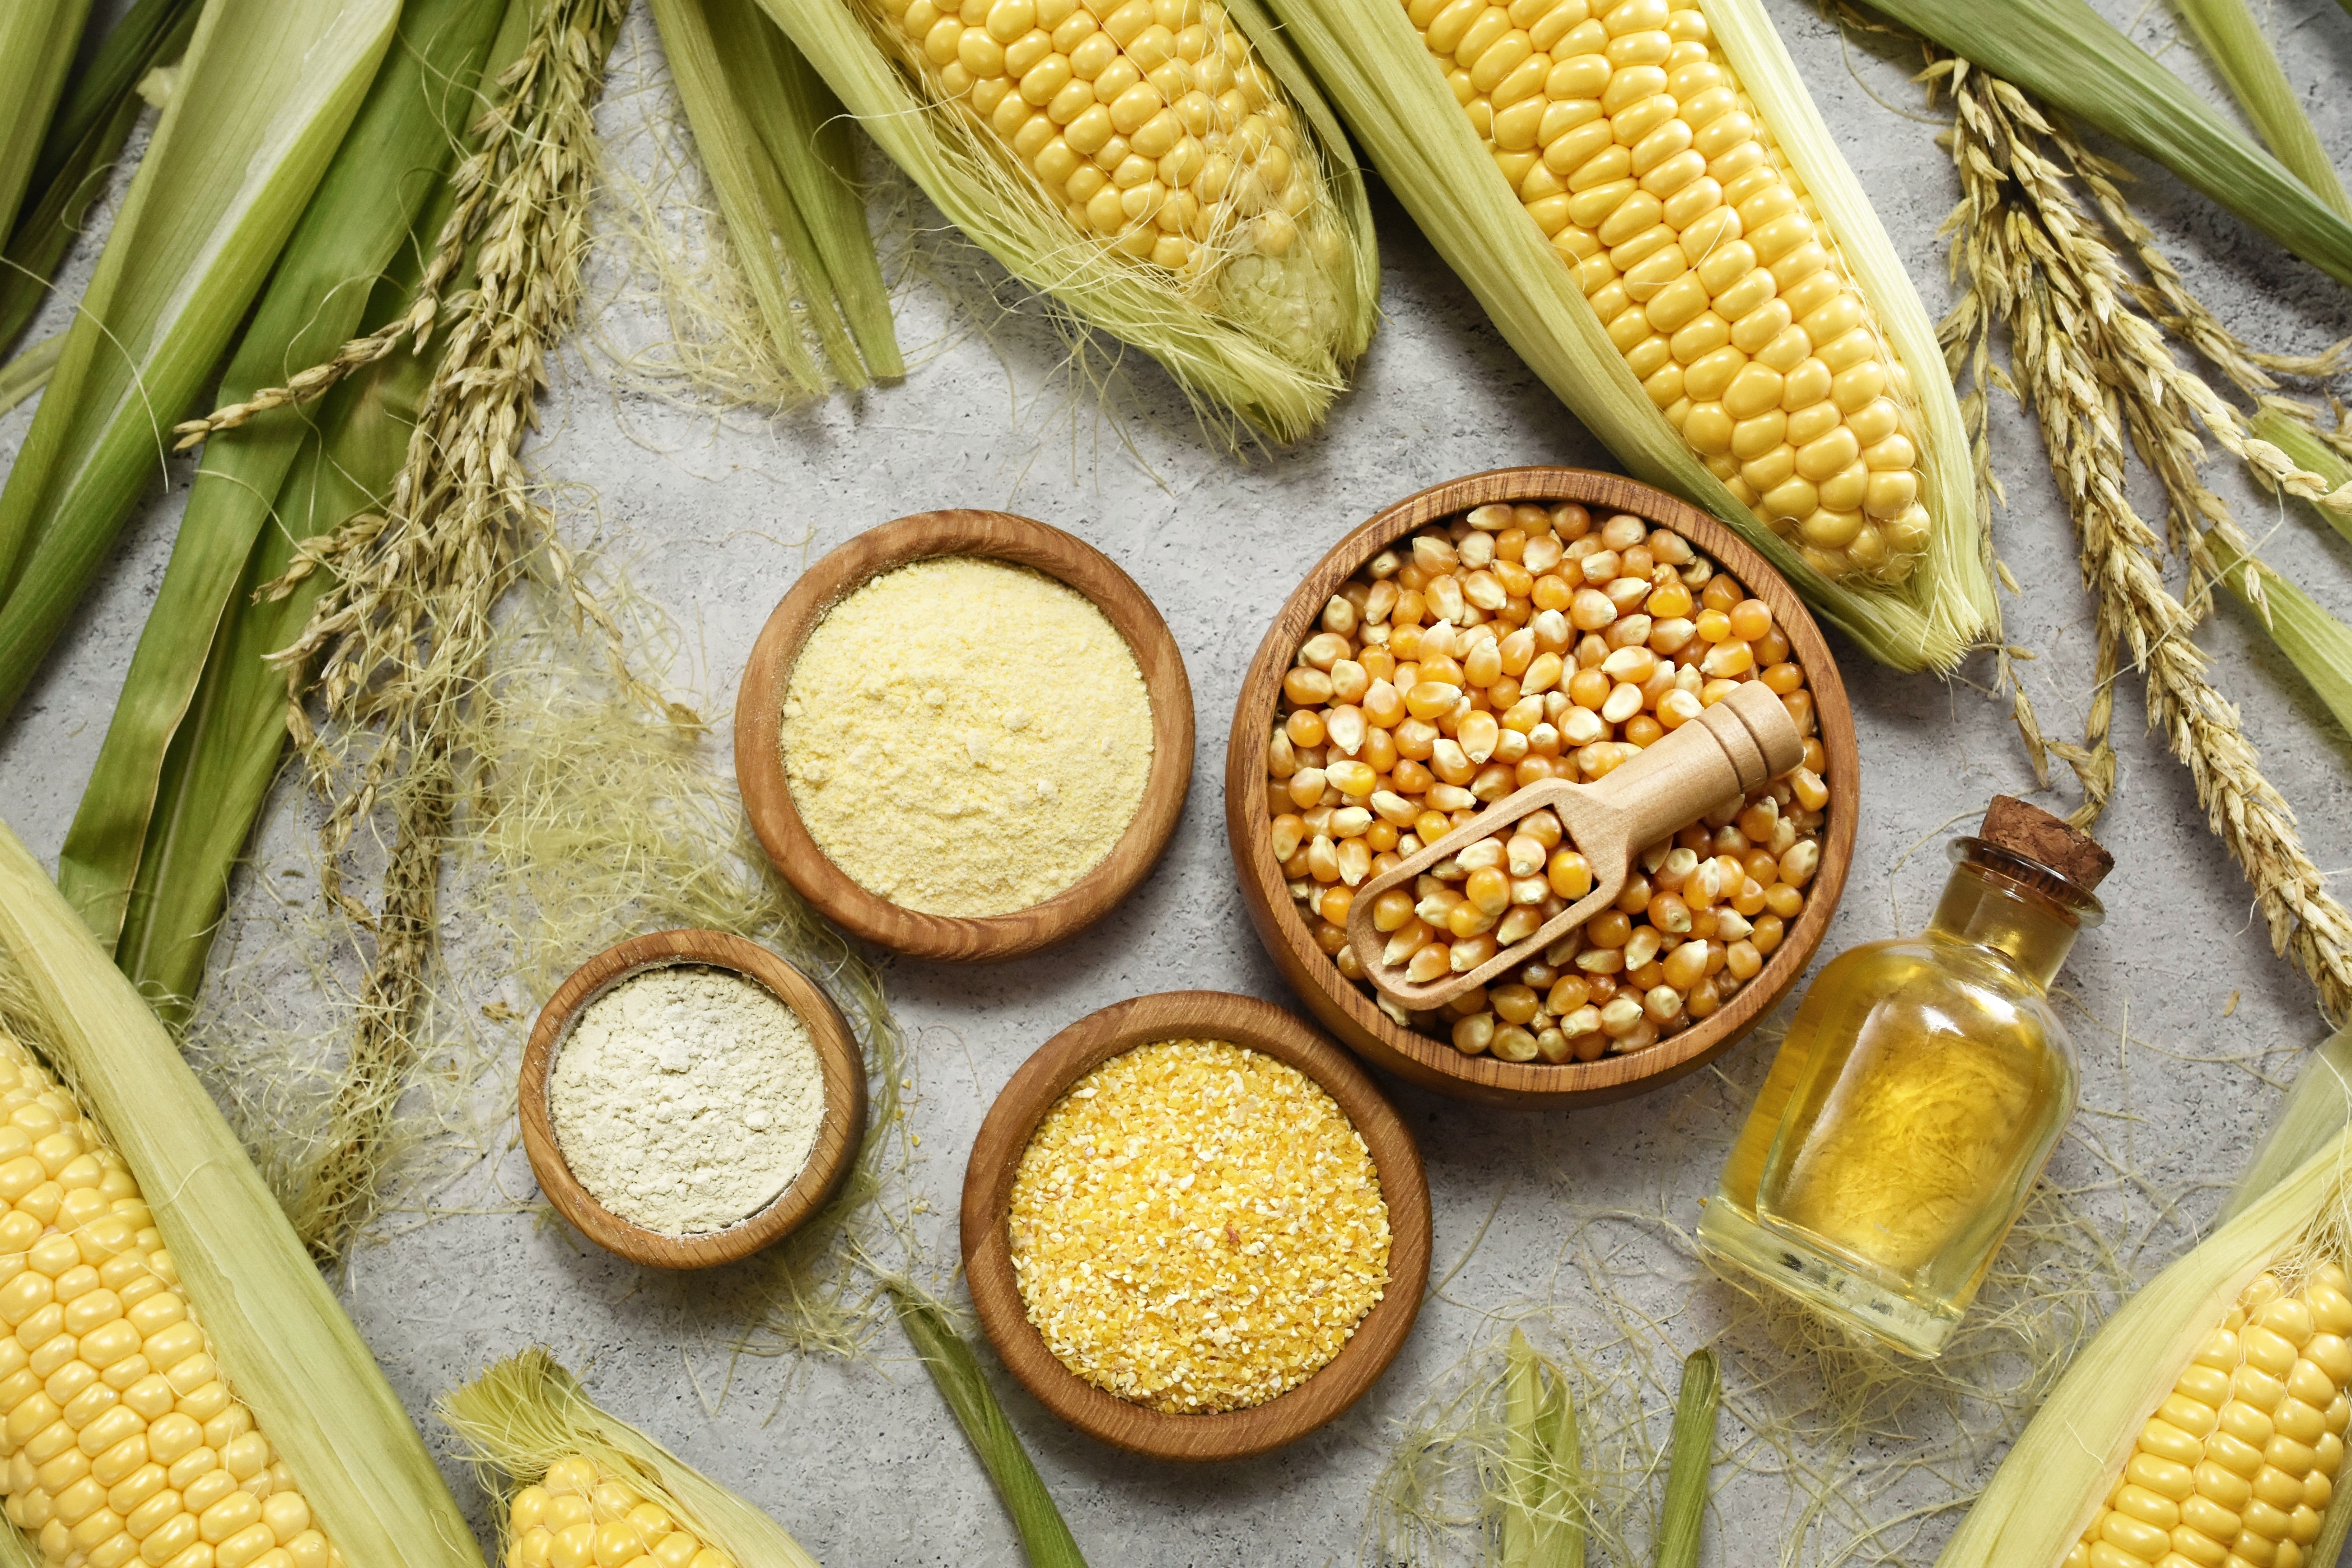 Yellow corn kernels, seeds, flour, starch and oil on corn harvest background, healthy diet vegetarian food